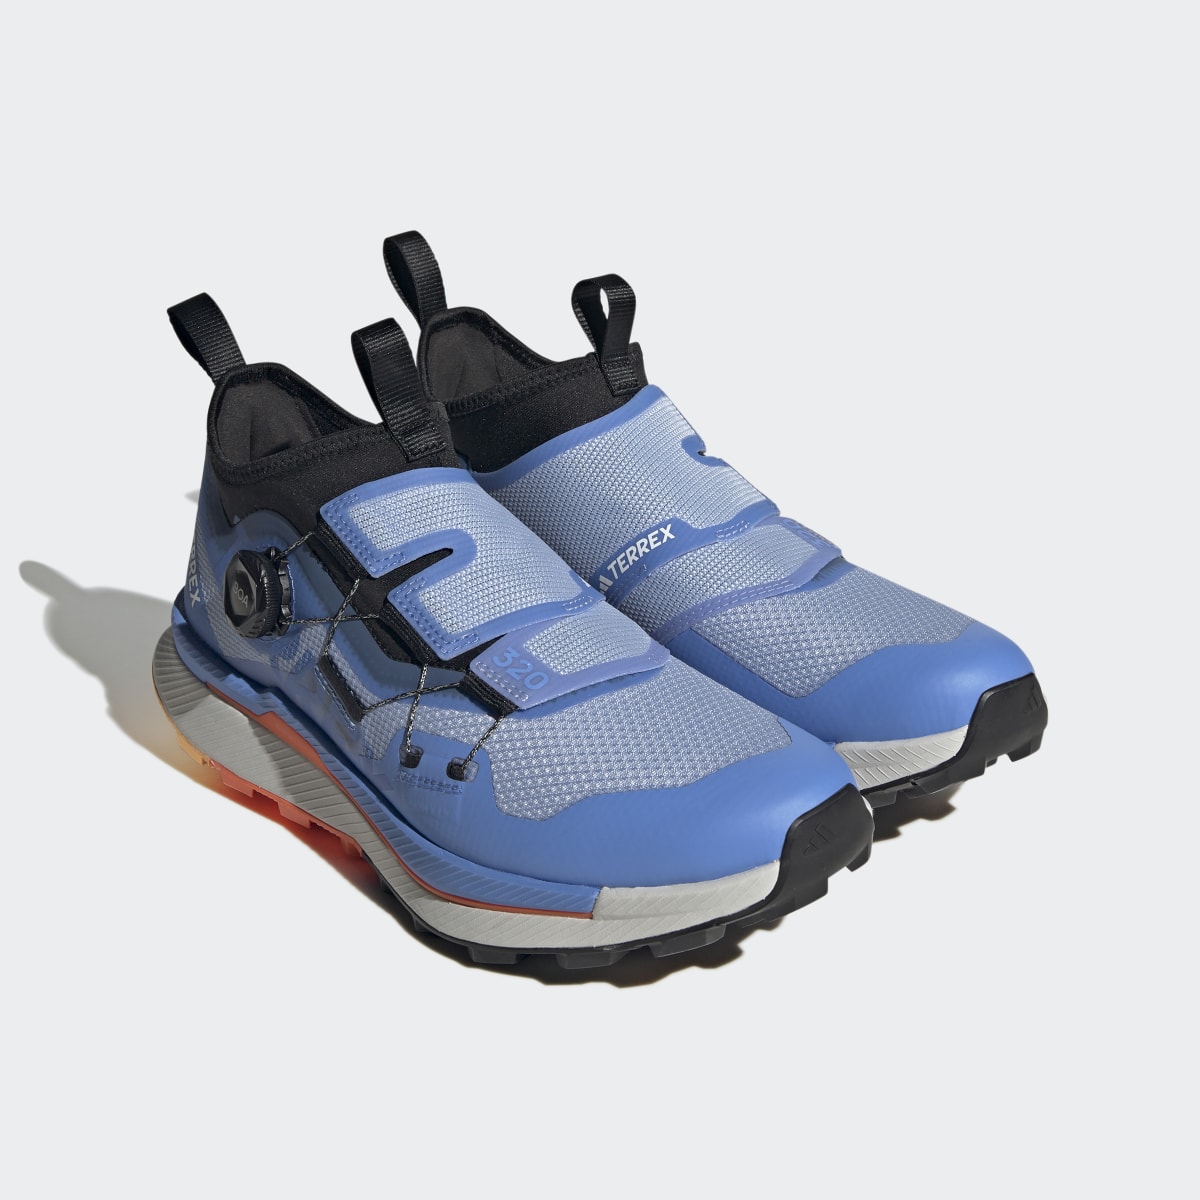 Adidas Terrex Agravic Pro Trail Running Shoes. 8